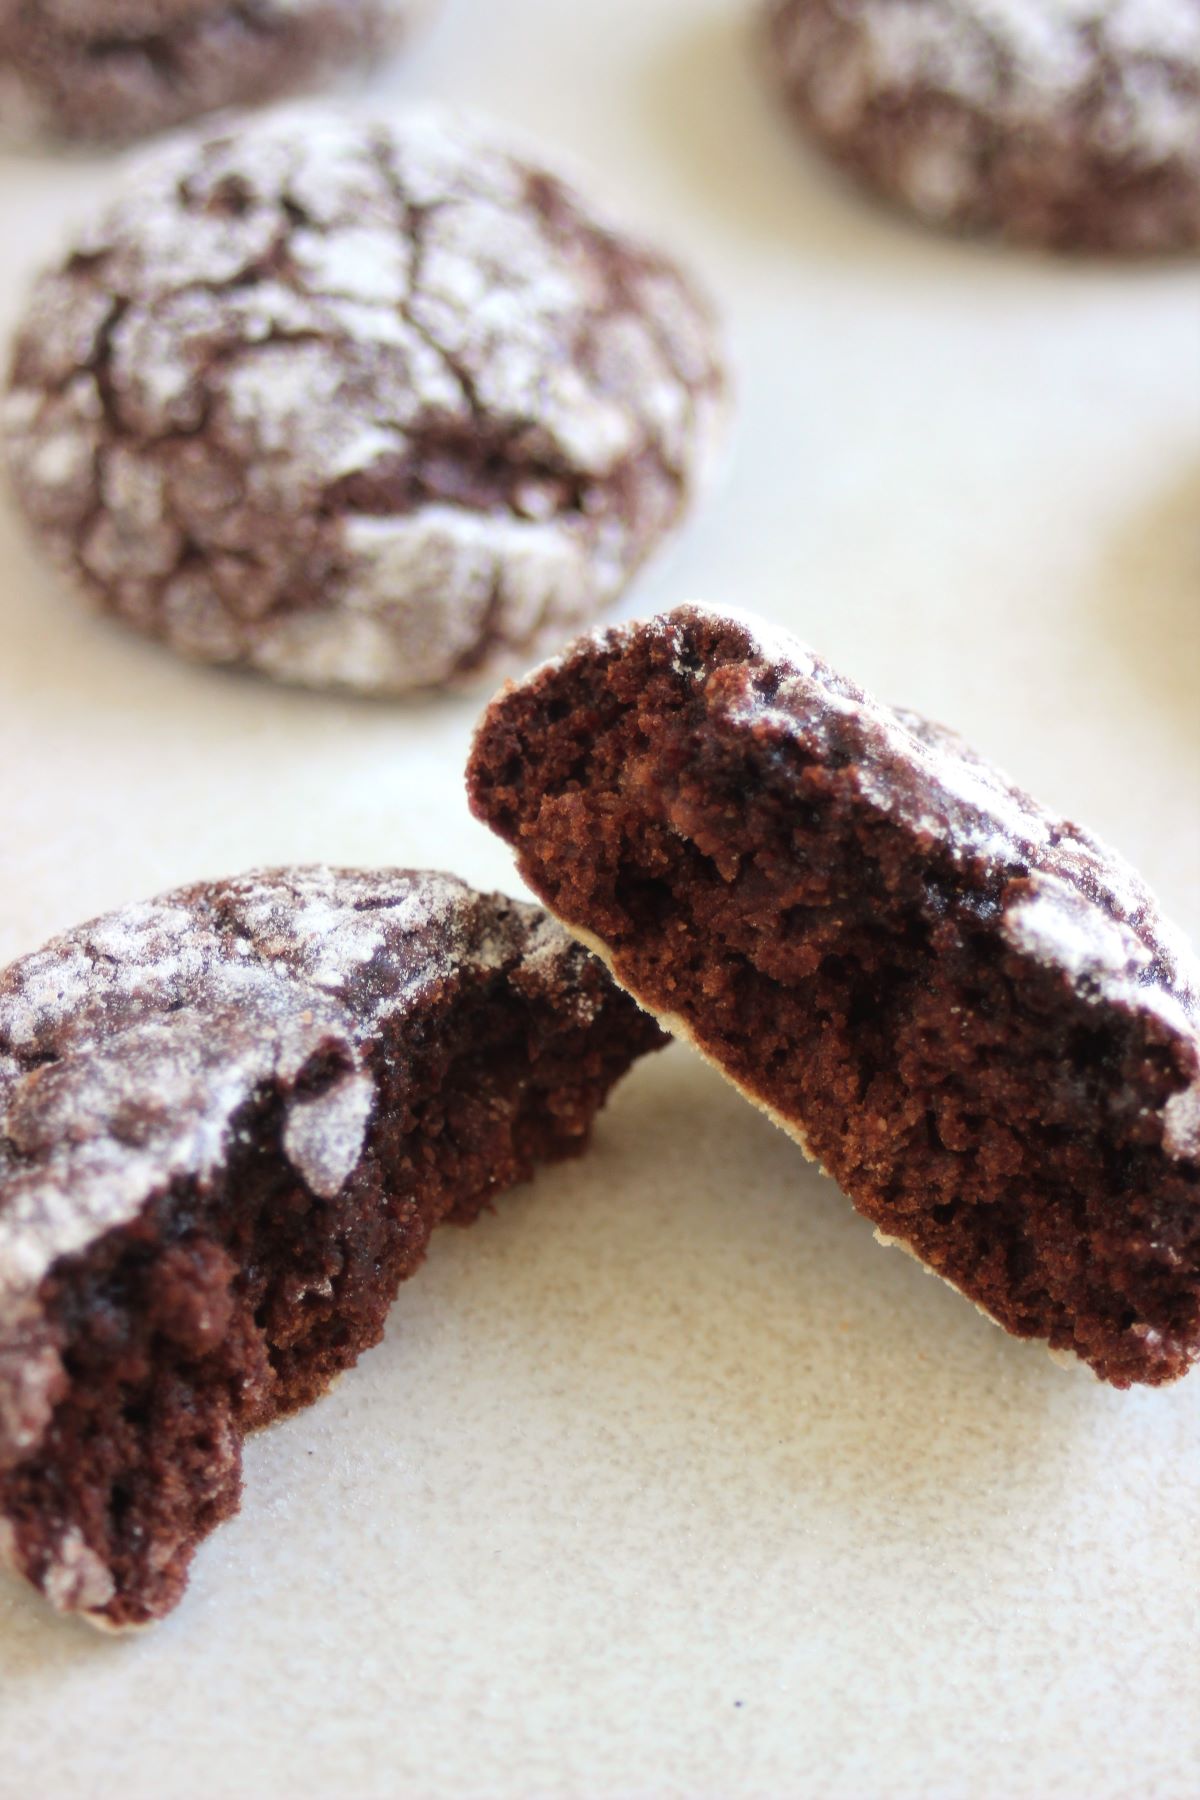 A chocolate crinkle cookie cut into two pieces.